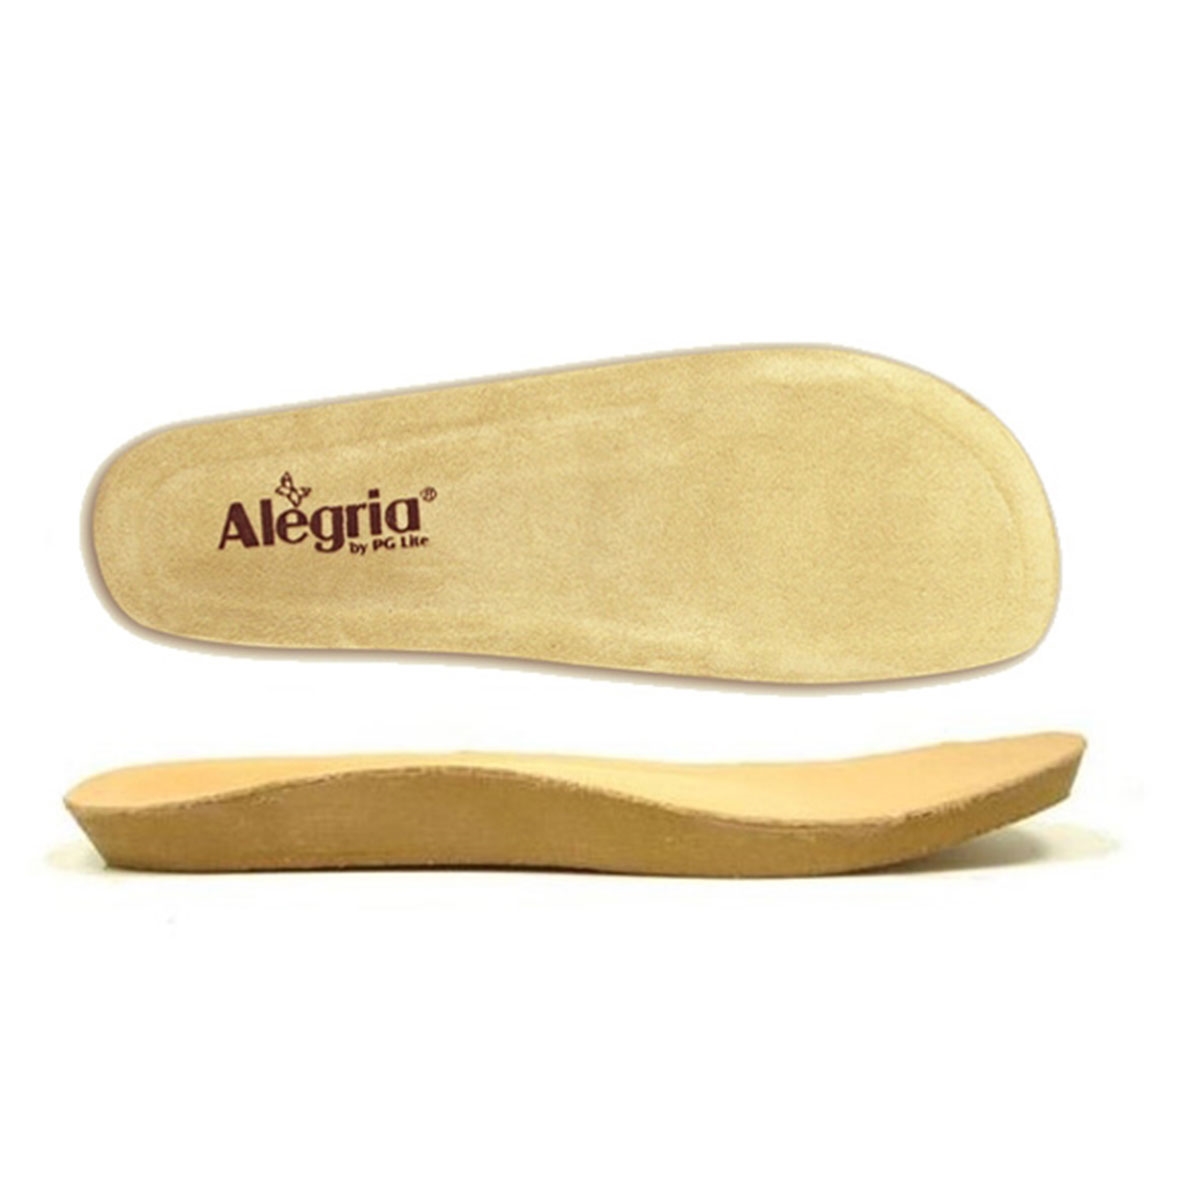 shoe insole replacement